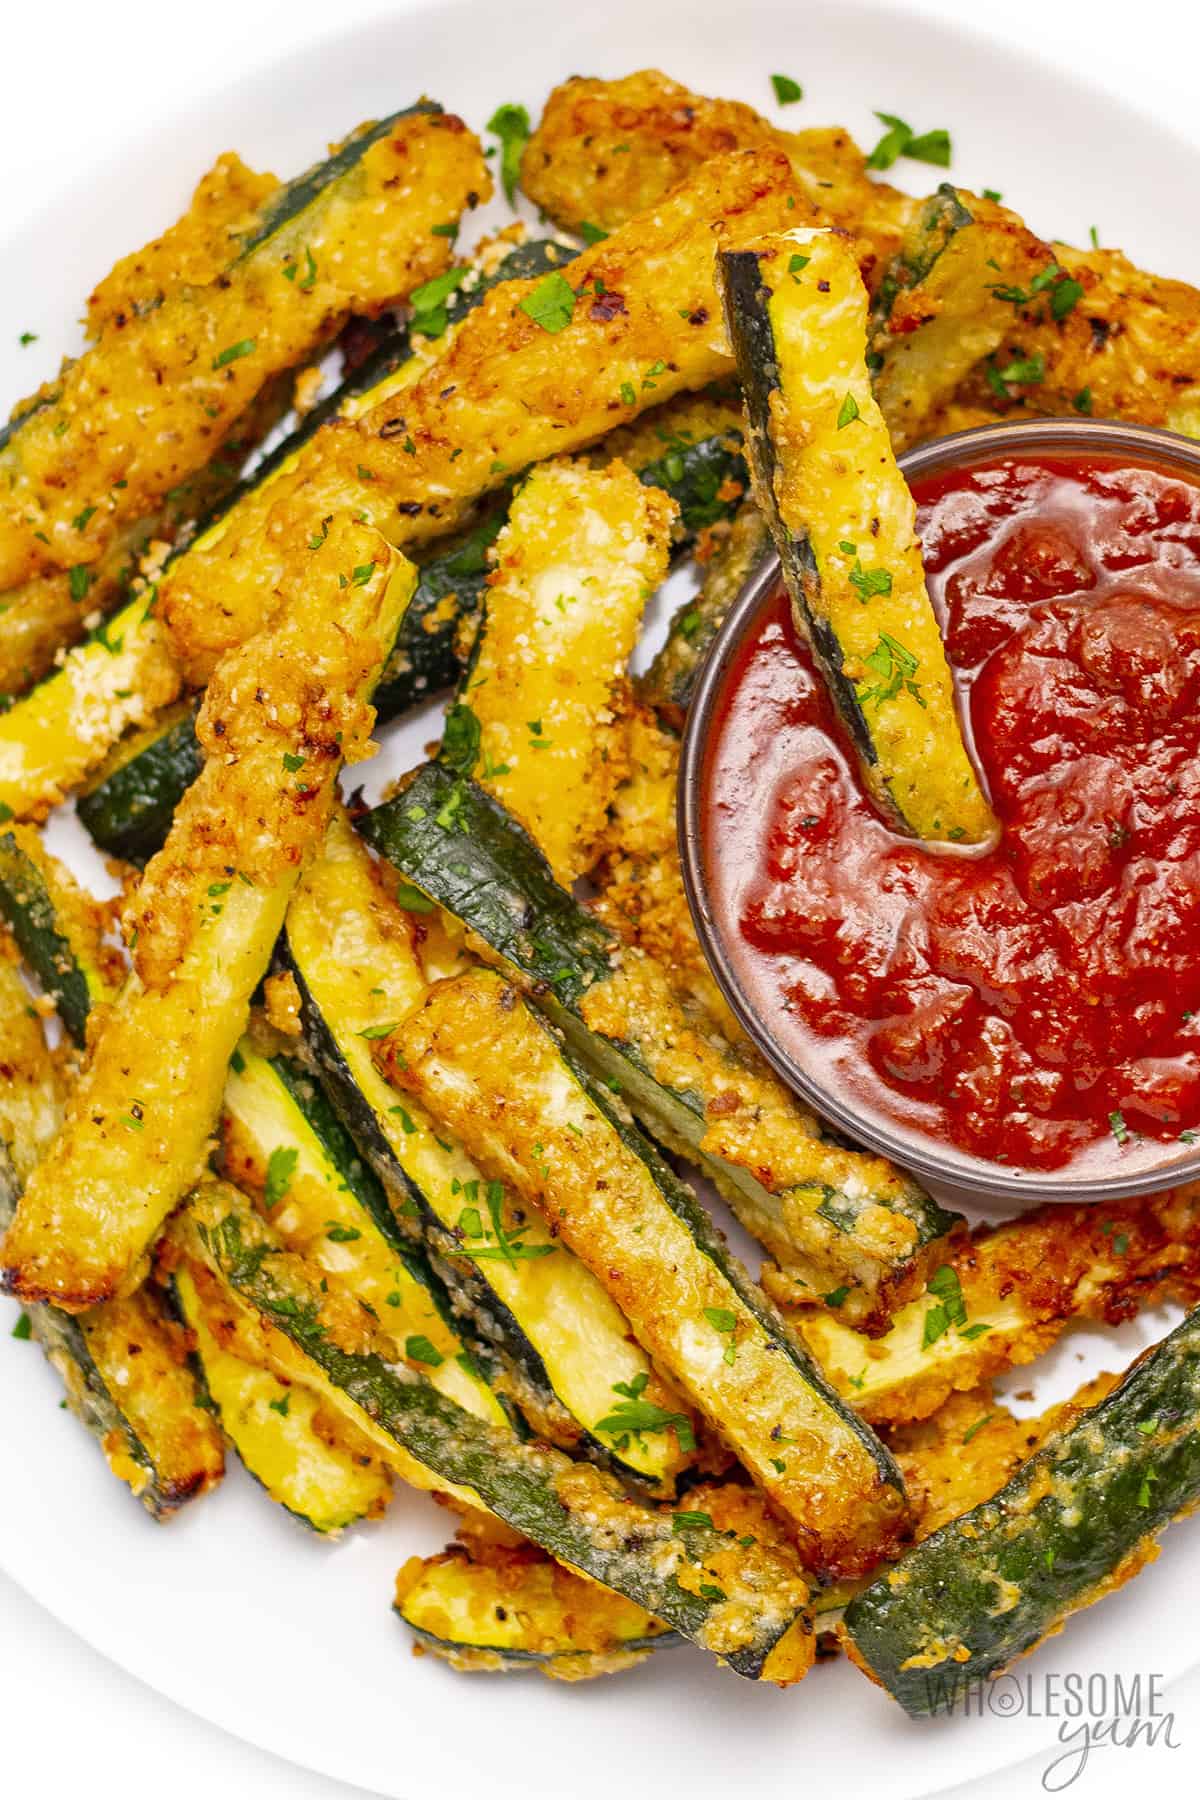 Zucchini fries with one fry dipped in marinara.